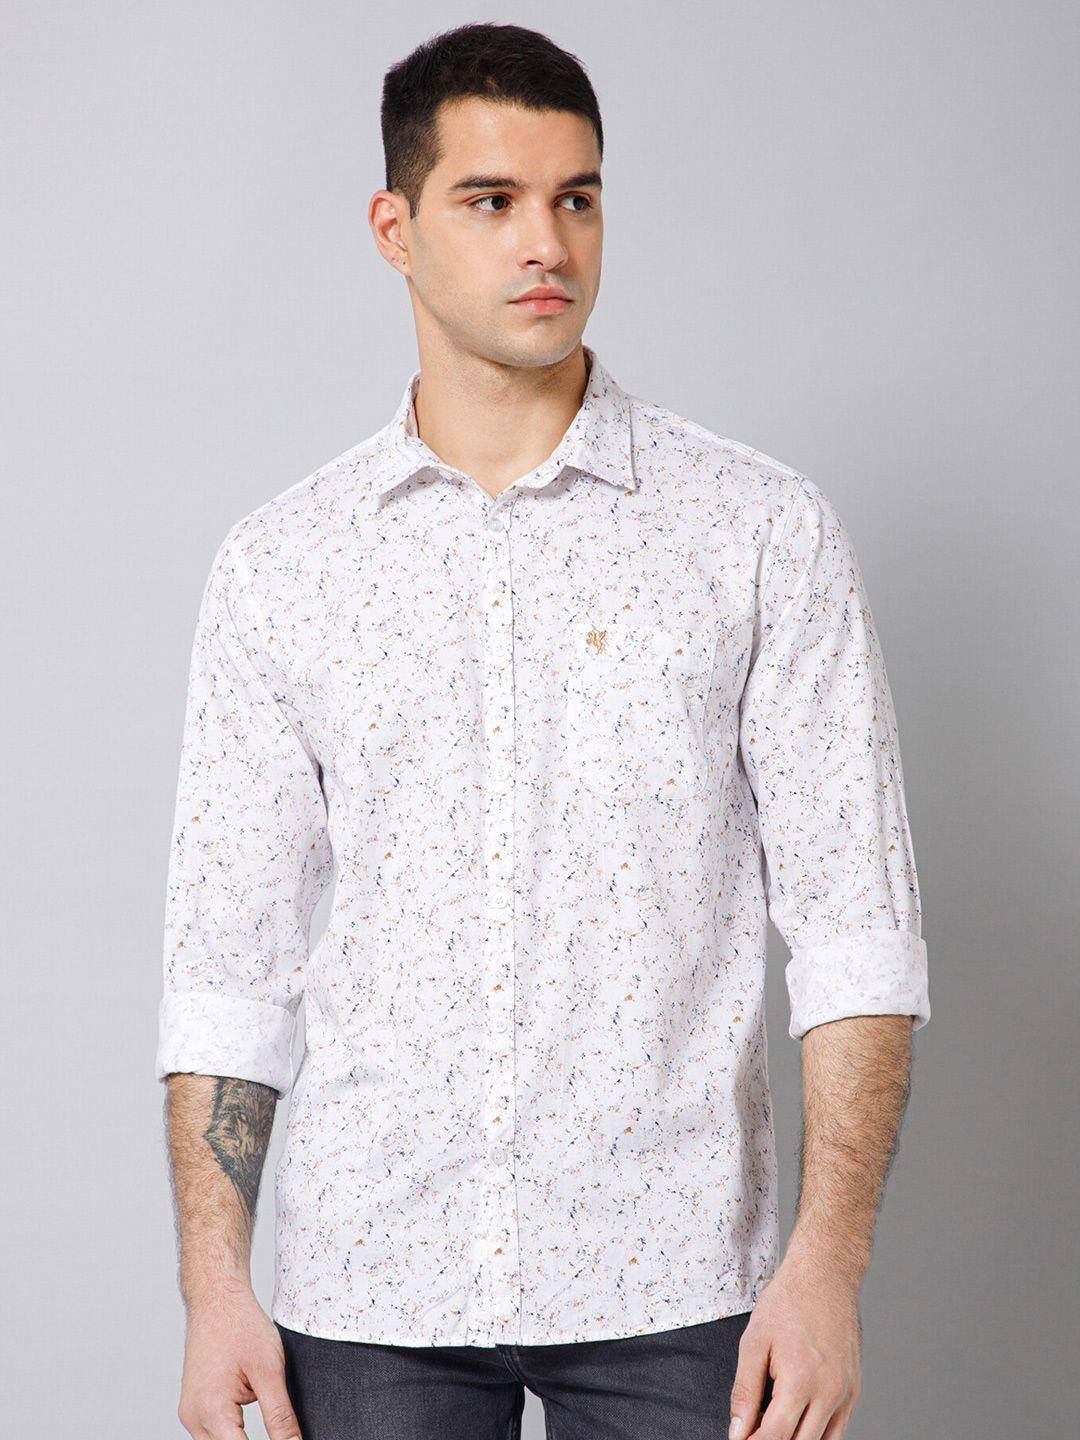 cantabil comfort abstract printed casual cotton shirt